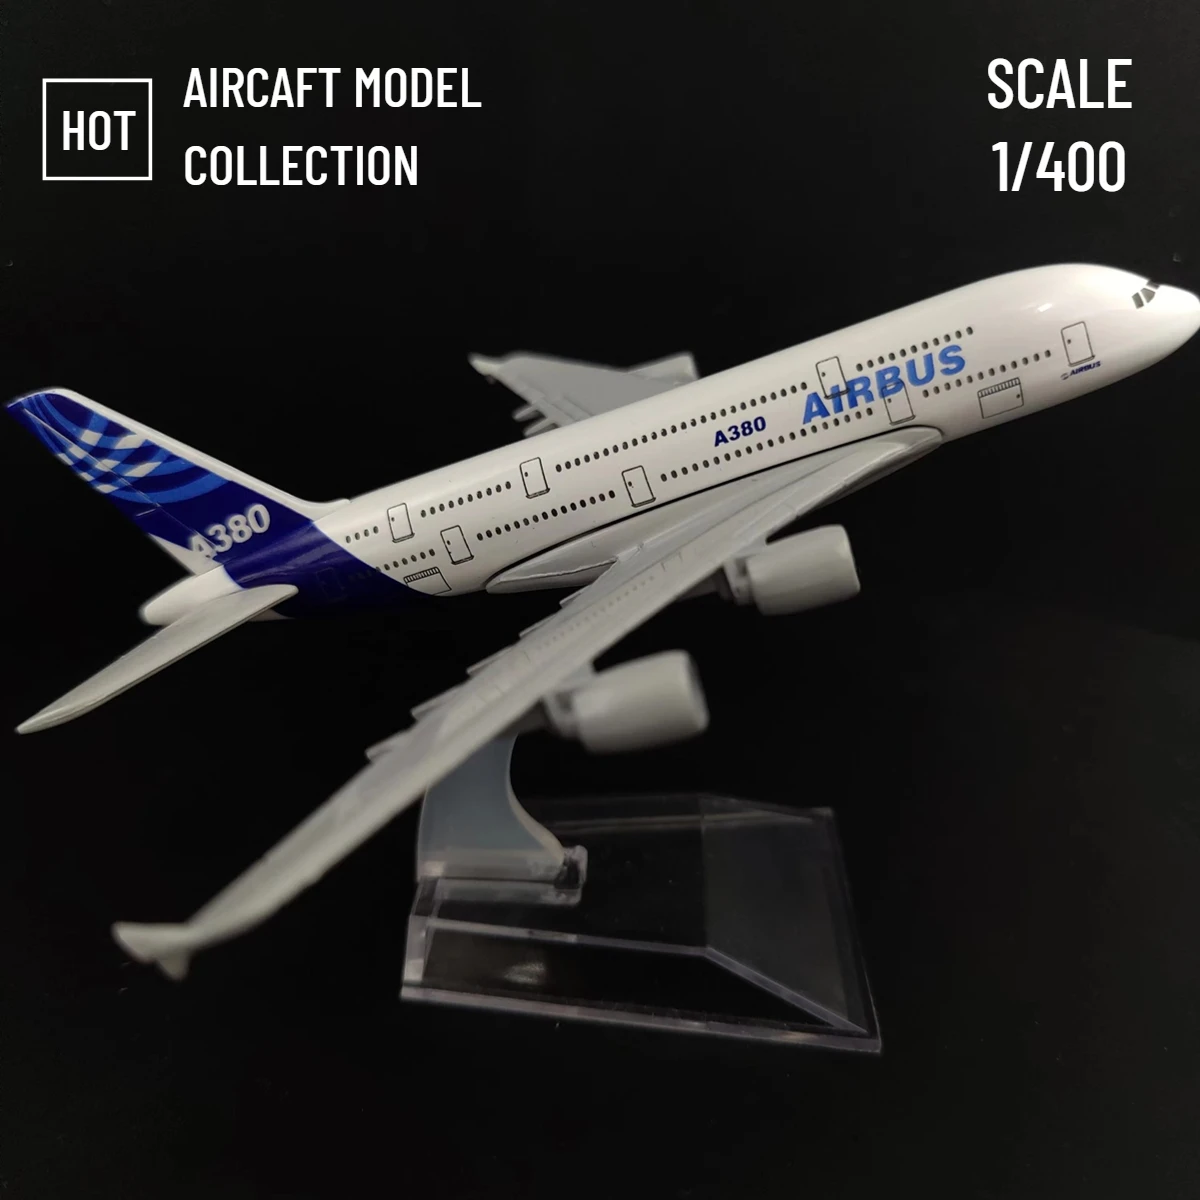 

Scale 1:400 Metal Aircraft Replica, Boeing Airbus Neo 320 380 787 Airplane Model Miniature, Aviation Collection Gift Toy for Boy